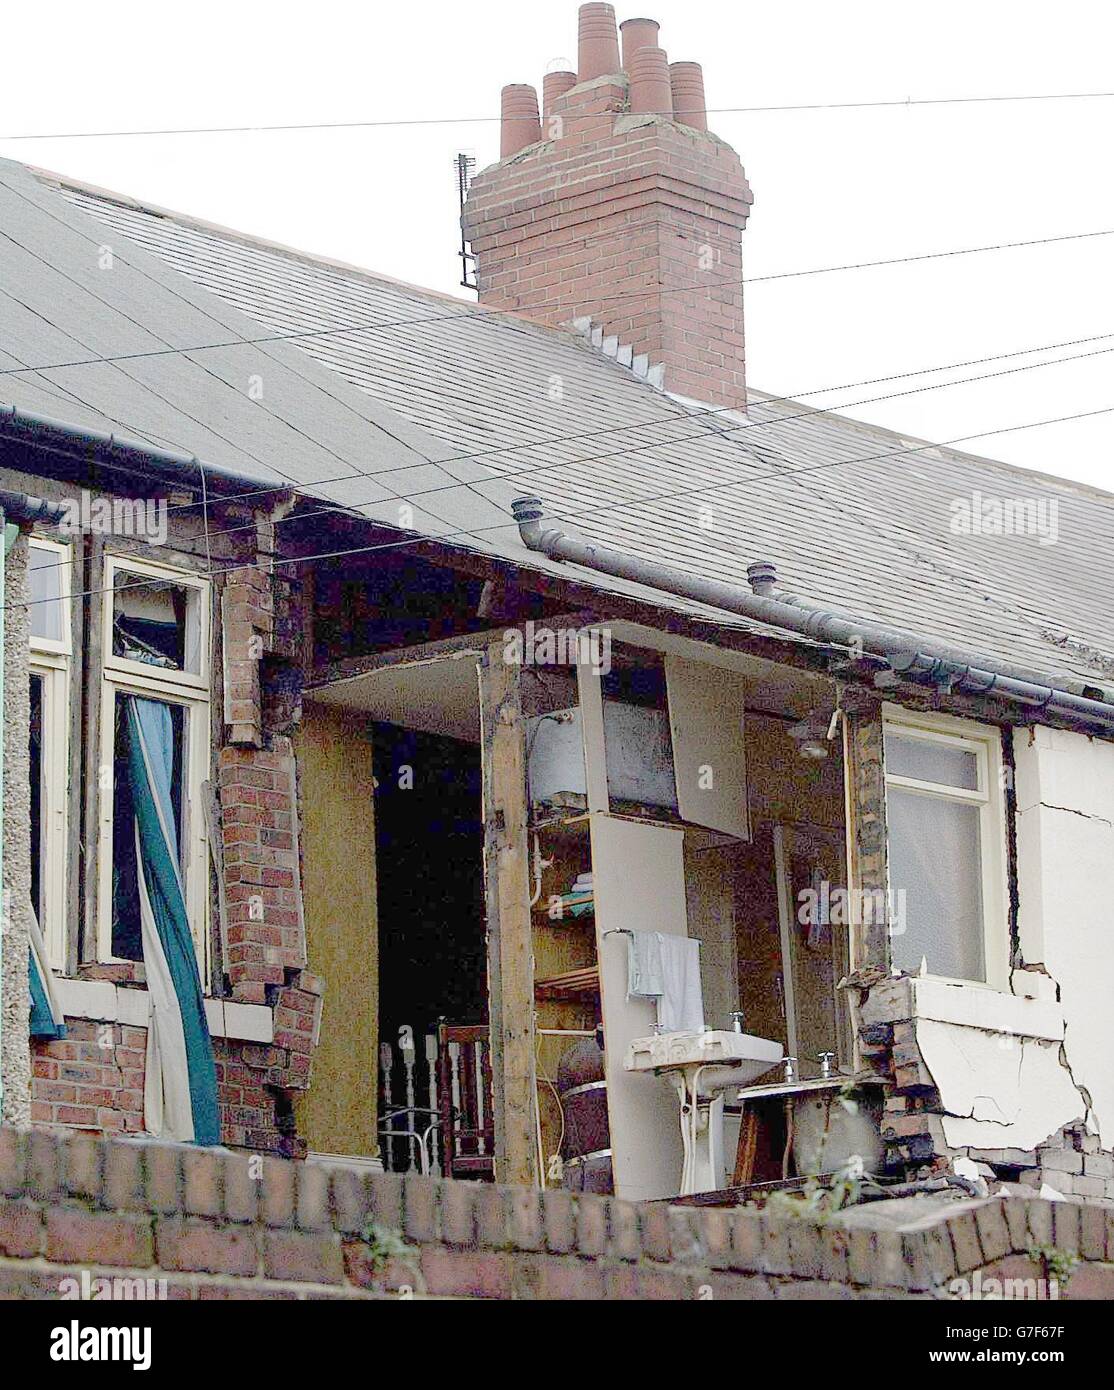 A 93-year-old woman was burned in a gas explosion which destroyed her home, a fire brigade spokeswoman said today. The pensioner suffered head injuries and burns to her face, legs and arms in the huge blast at her home in Sackville Road, Heaton, Newcastle. Stock Photo